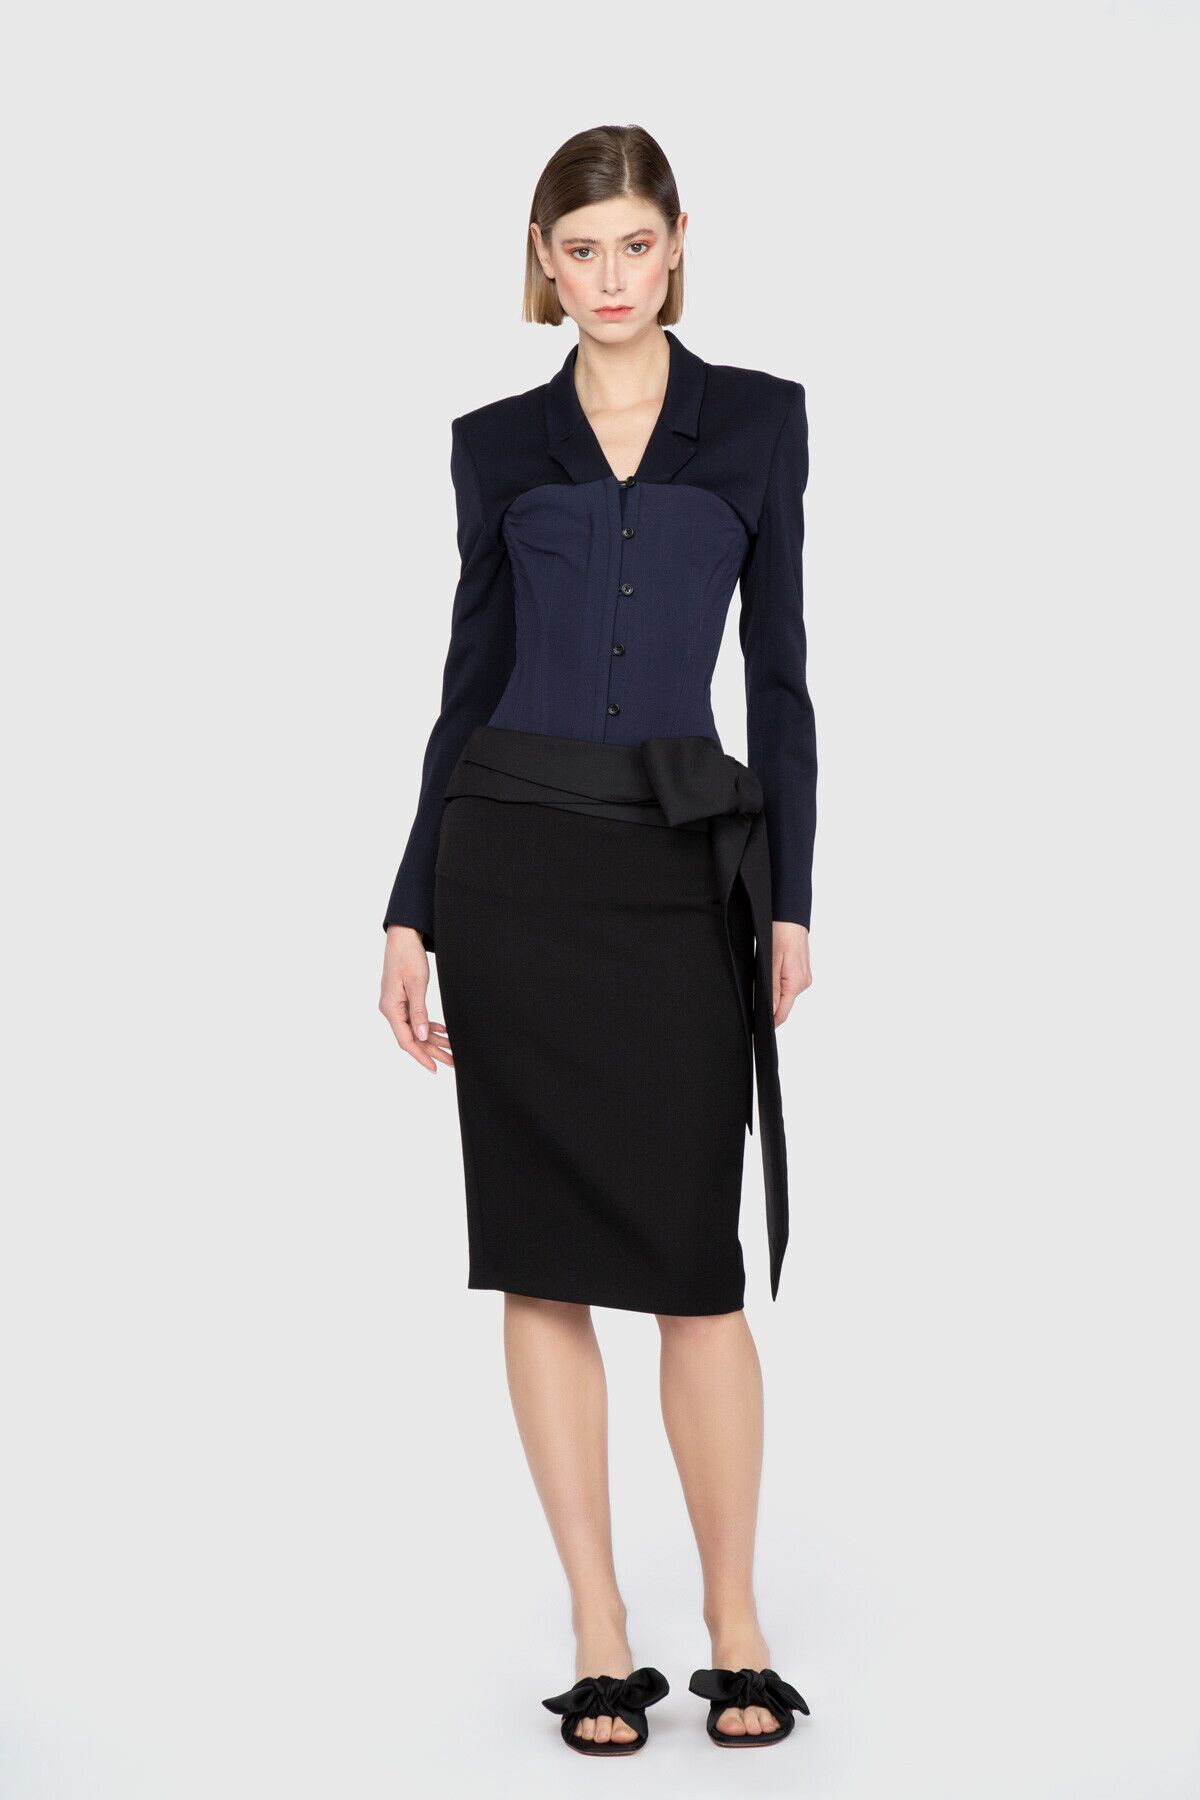 GIZIAGATE - Contrast Fabric Detailed Knee Length Black Pencil Skirt